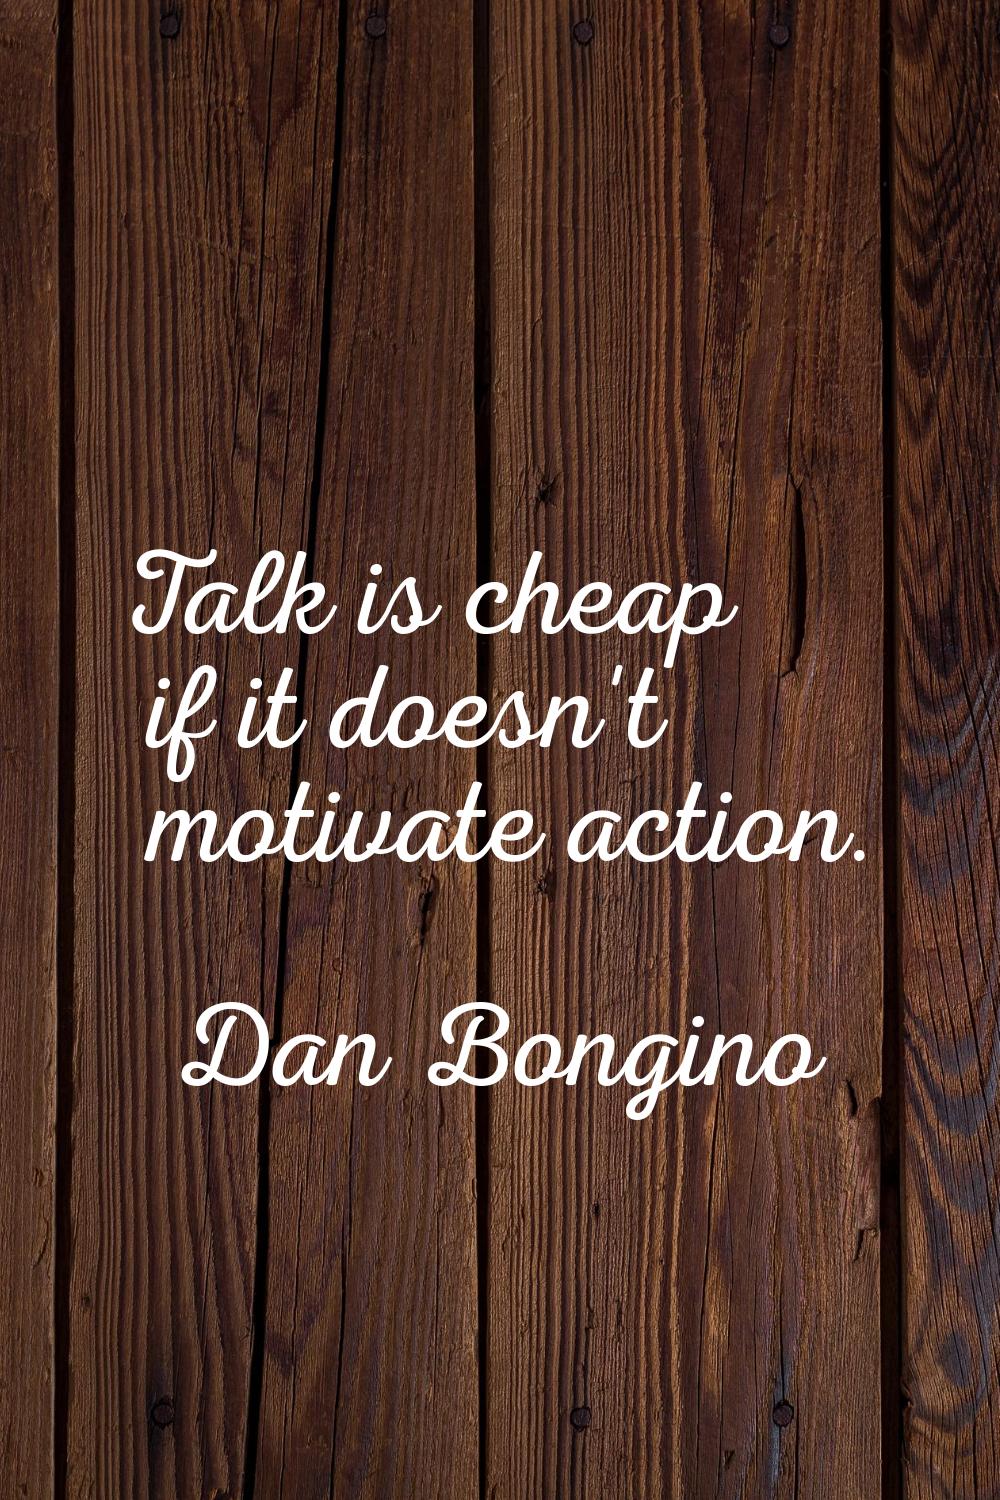 Talk is cheap if it doesn't motivate action.